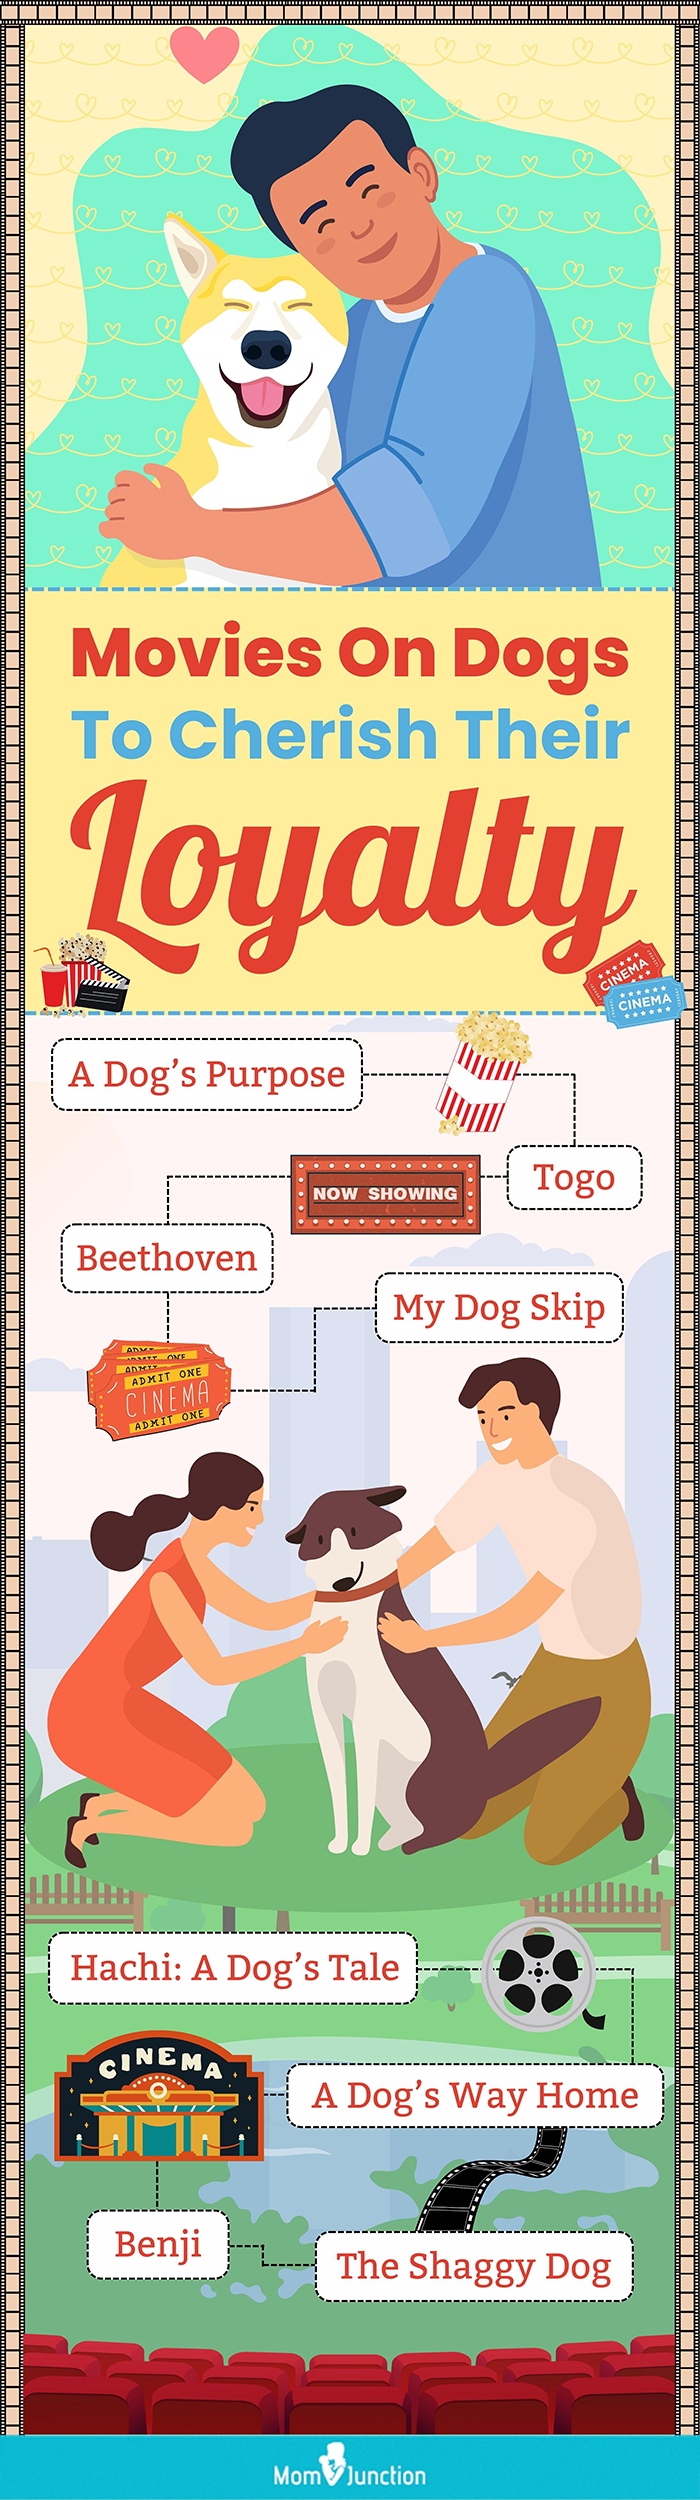 movies on dogs to cherish their loyalty (infographic)